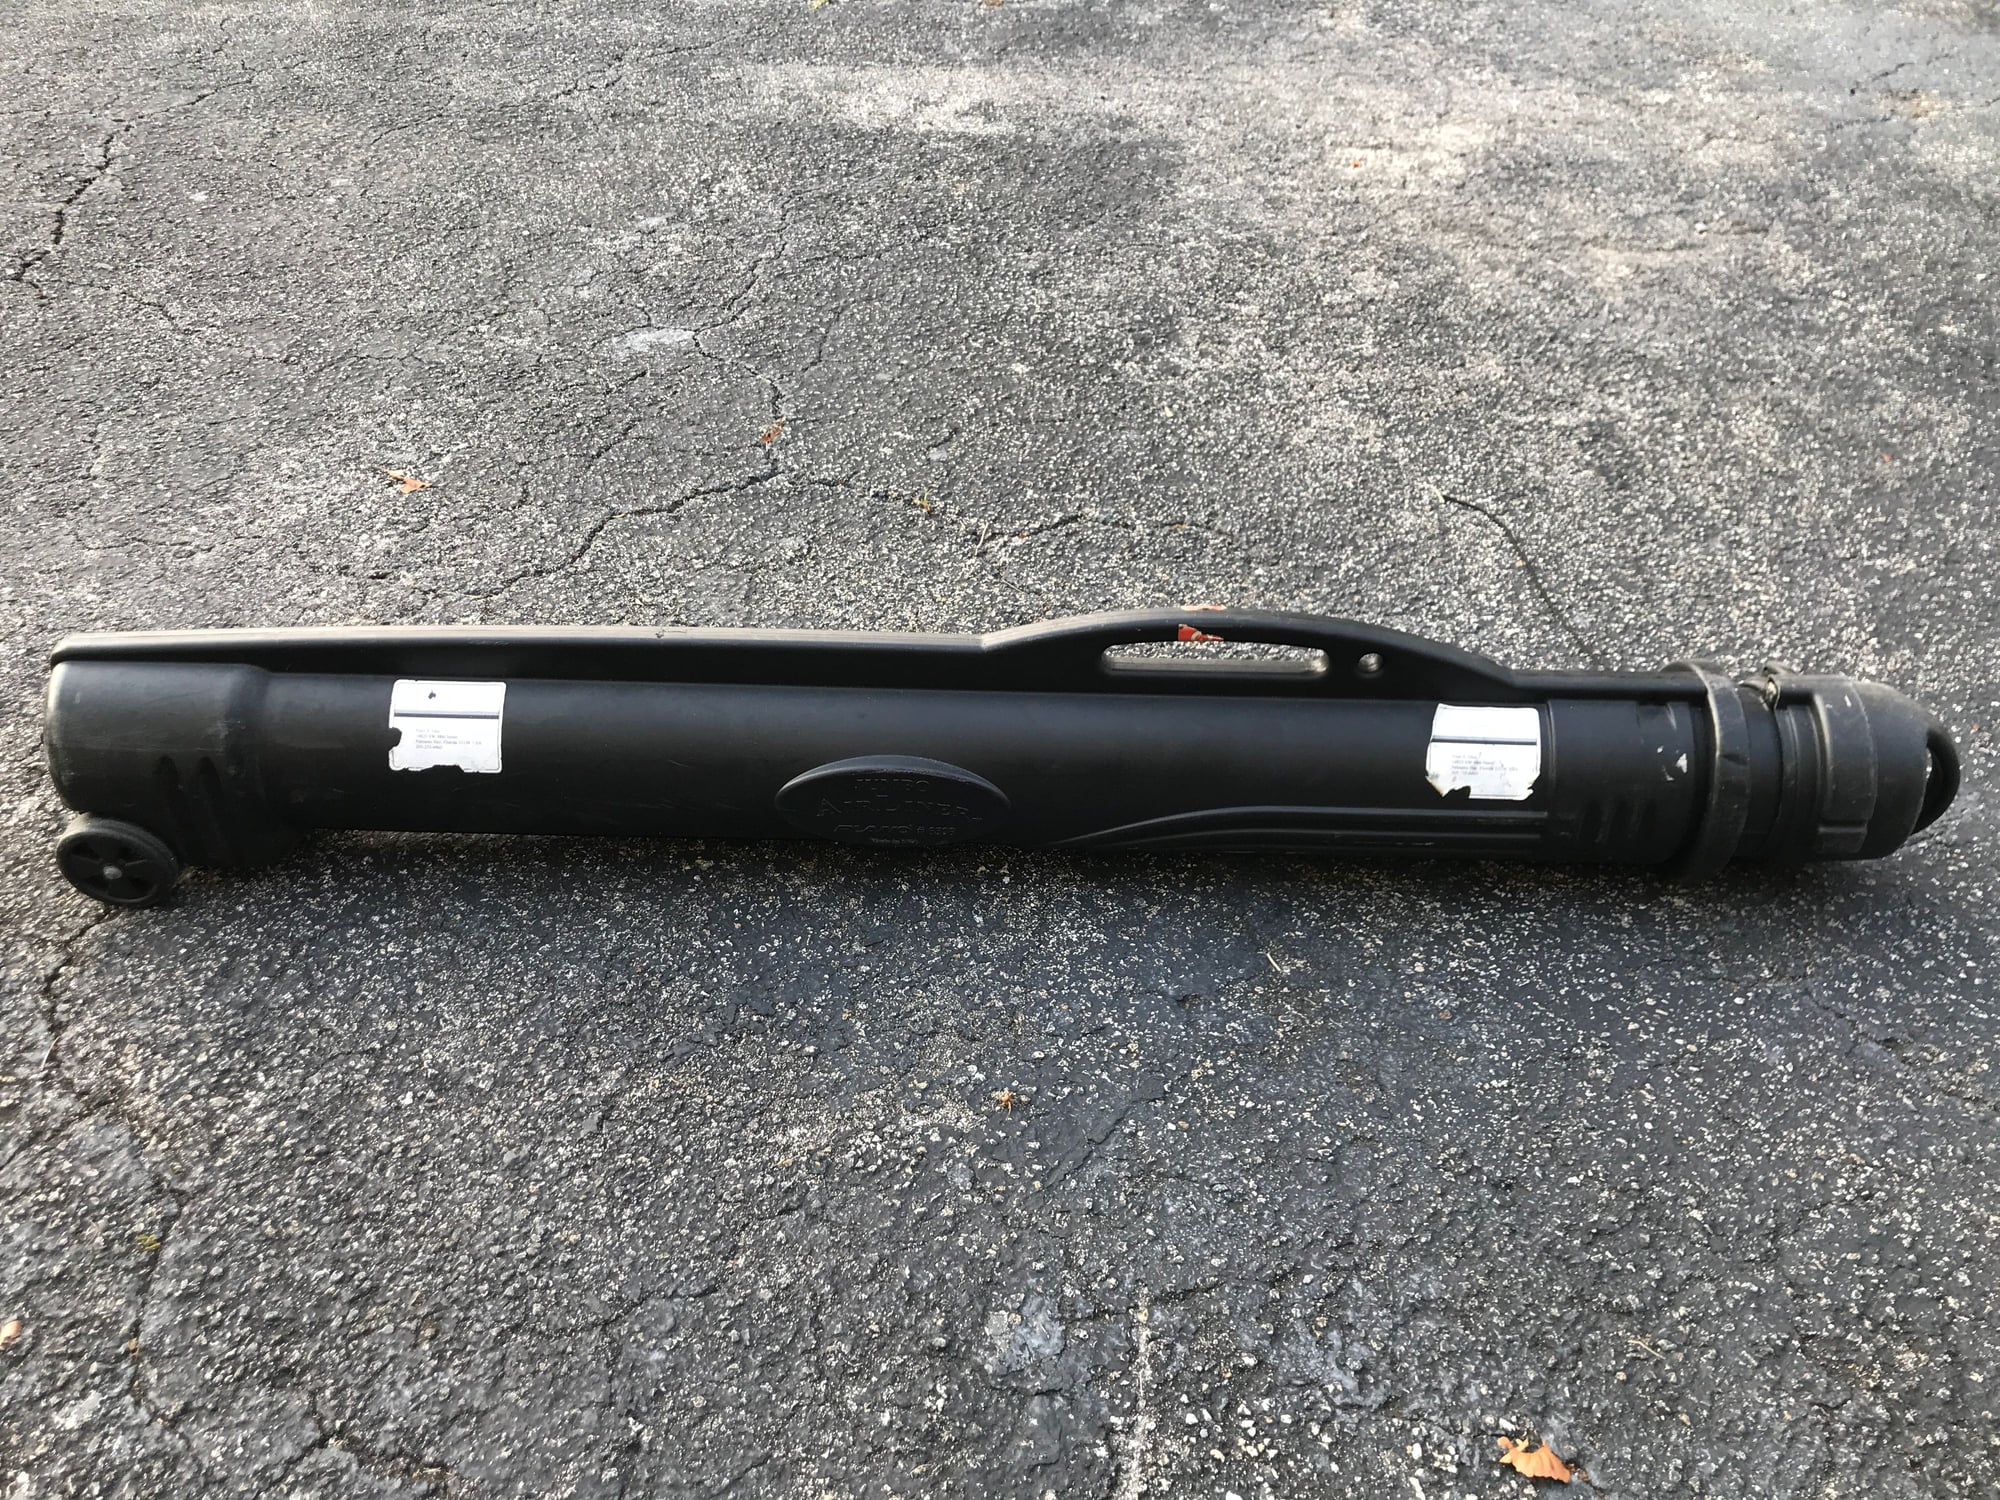 Plano Airliner Rod Case